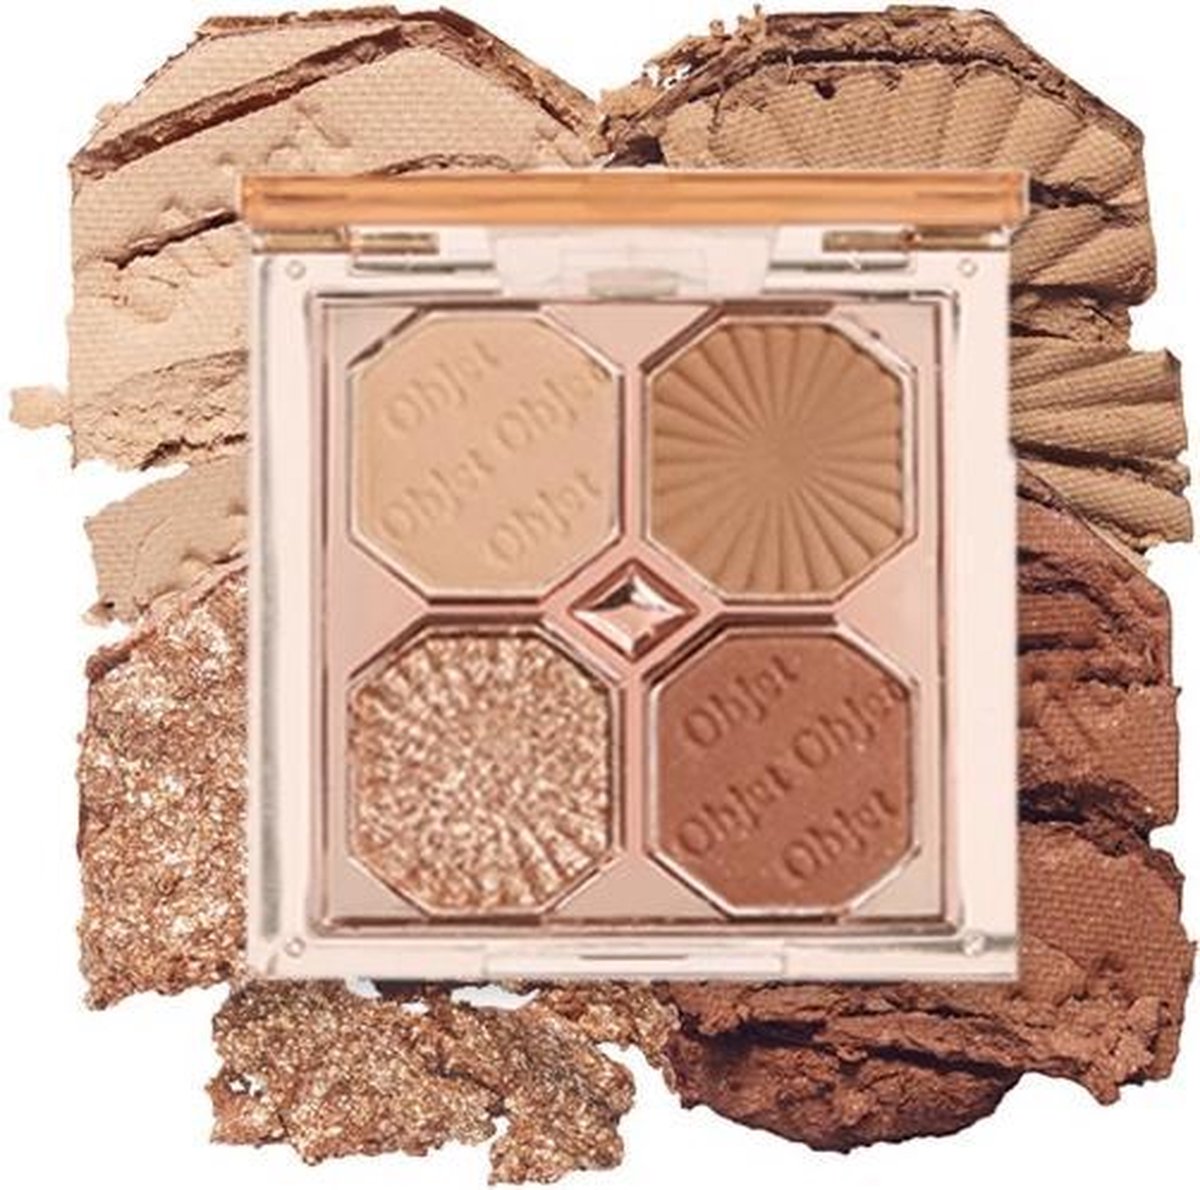 Etude House Play Color Mini Objet #Antique Candlestick - Pigmented Travel Eyeshadow Palette - Nude Neutral Browns - Glowy Popping Eyes - Korean Beauty Cosmetics